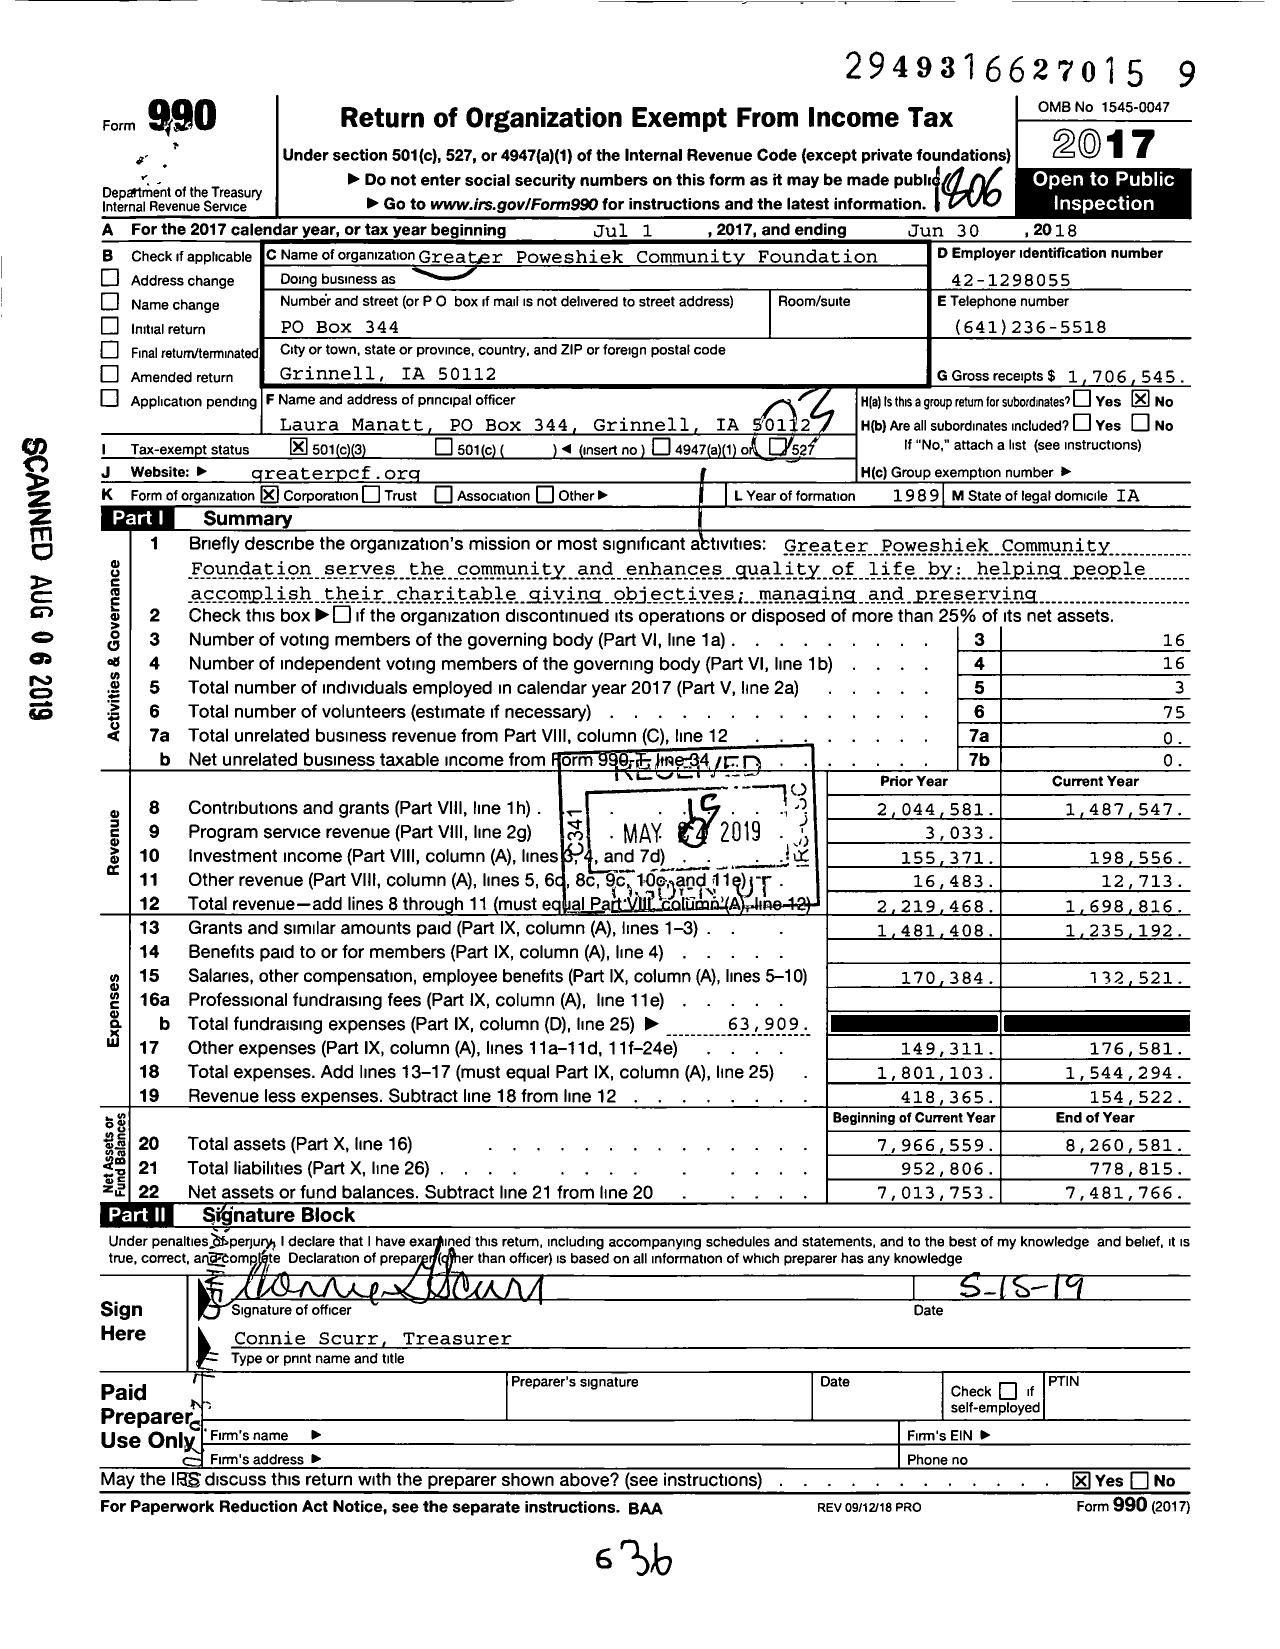 Image of first page of 2017 Form 990 for Greater Poweshiek Community Foundation